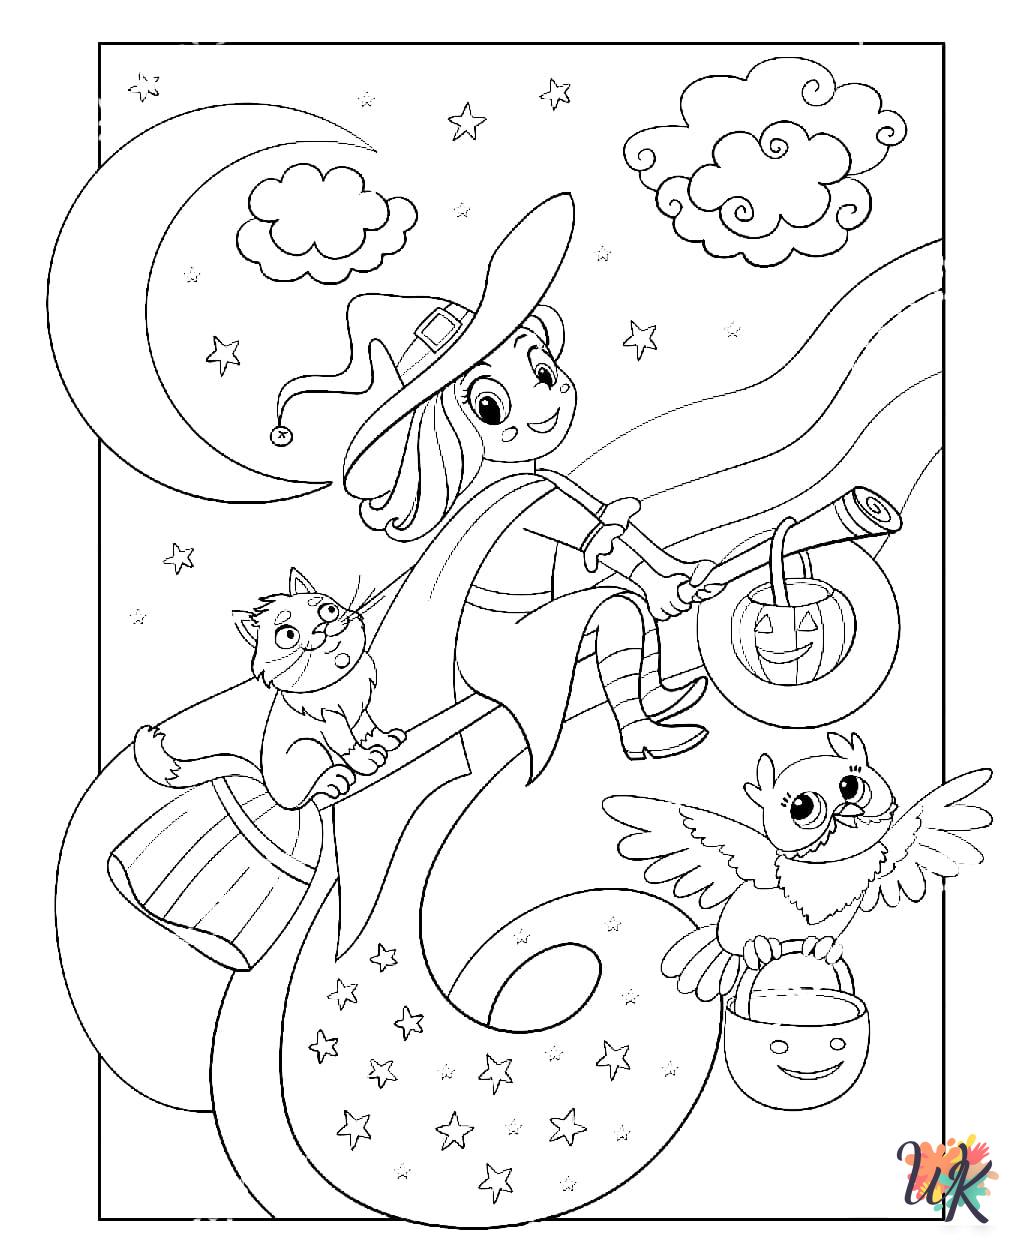 Witch coloring pages for adults